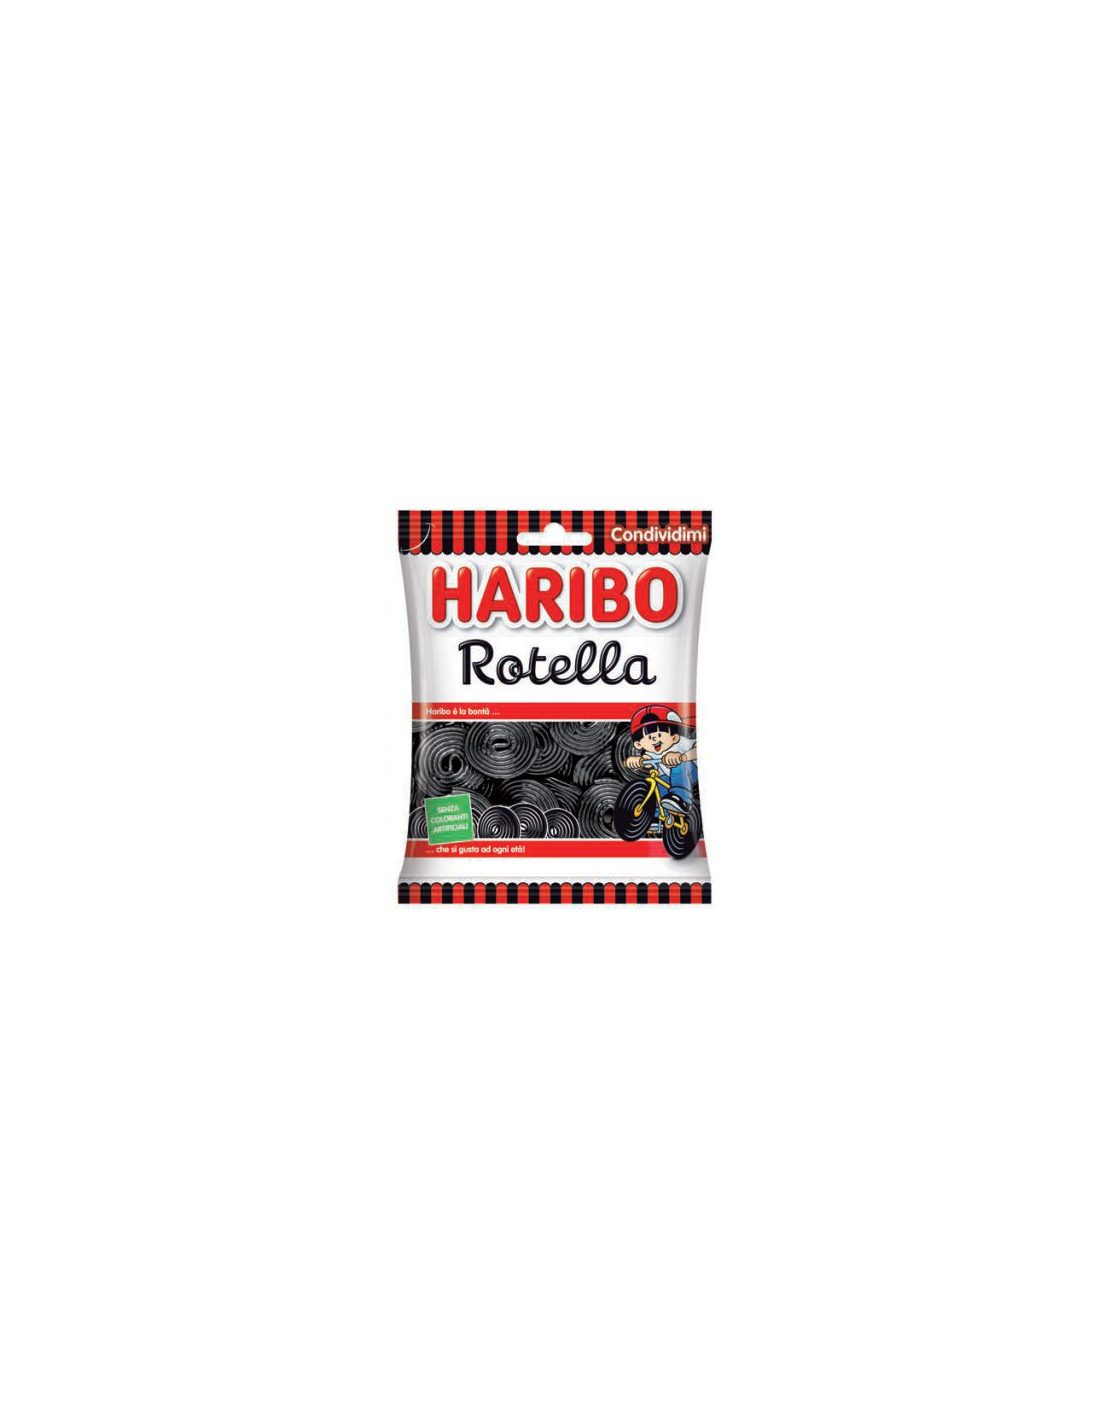 Haribo Rotella Licorice - 30 Packs of 100gr - Candies and Chewing Gum